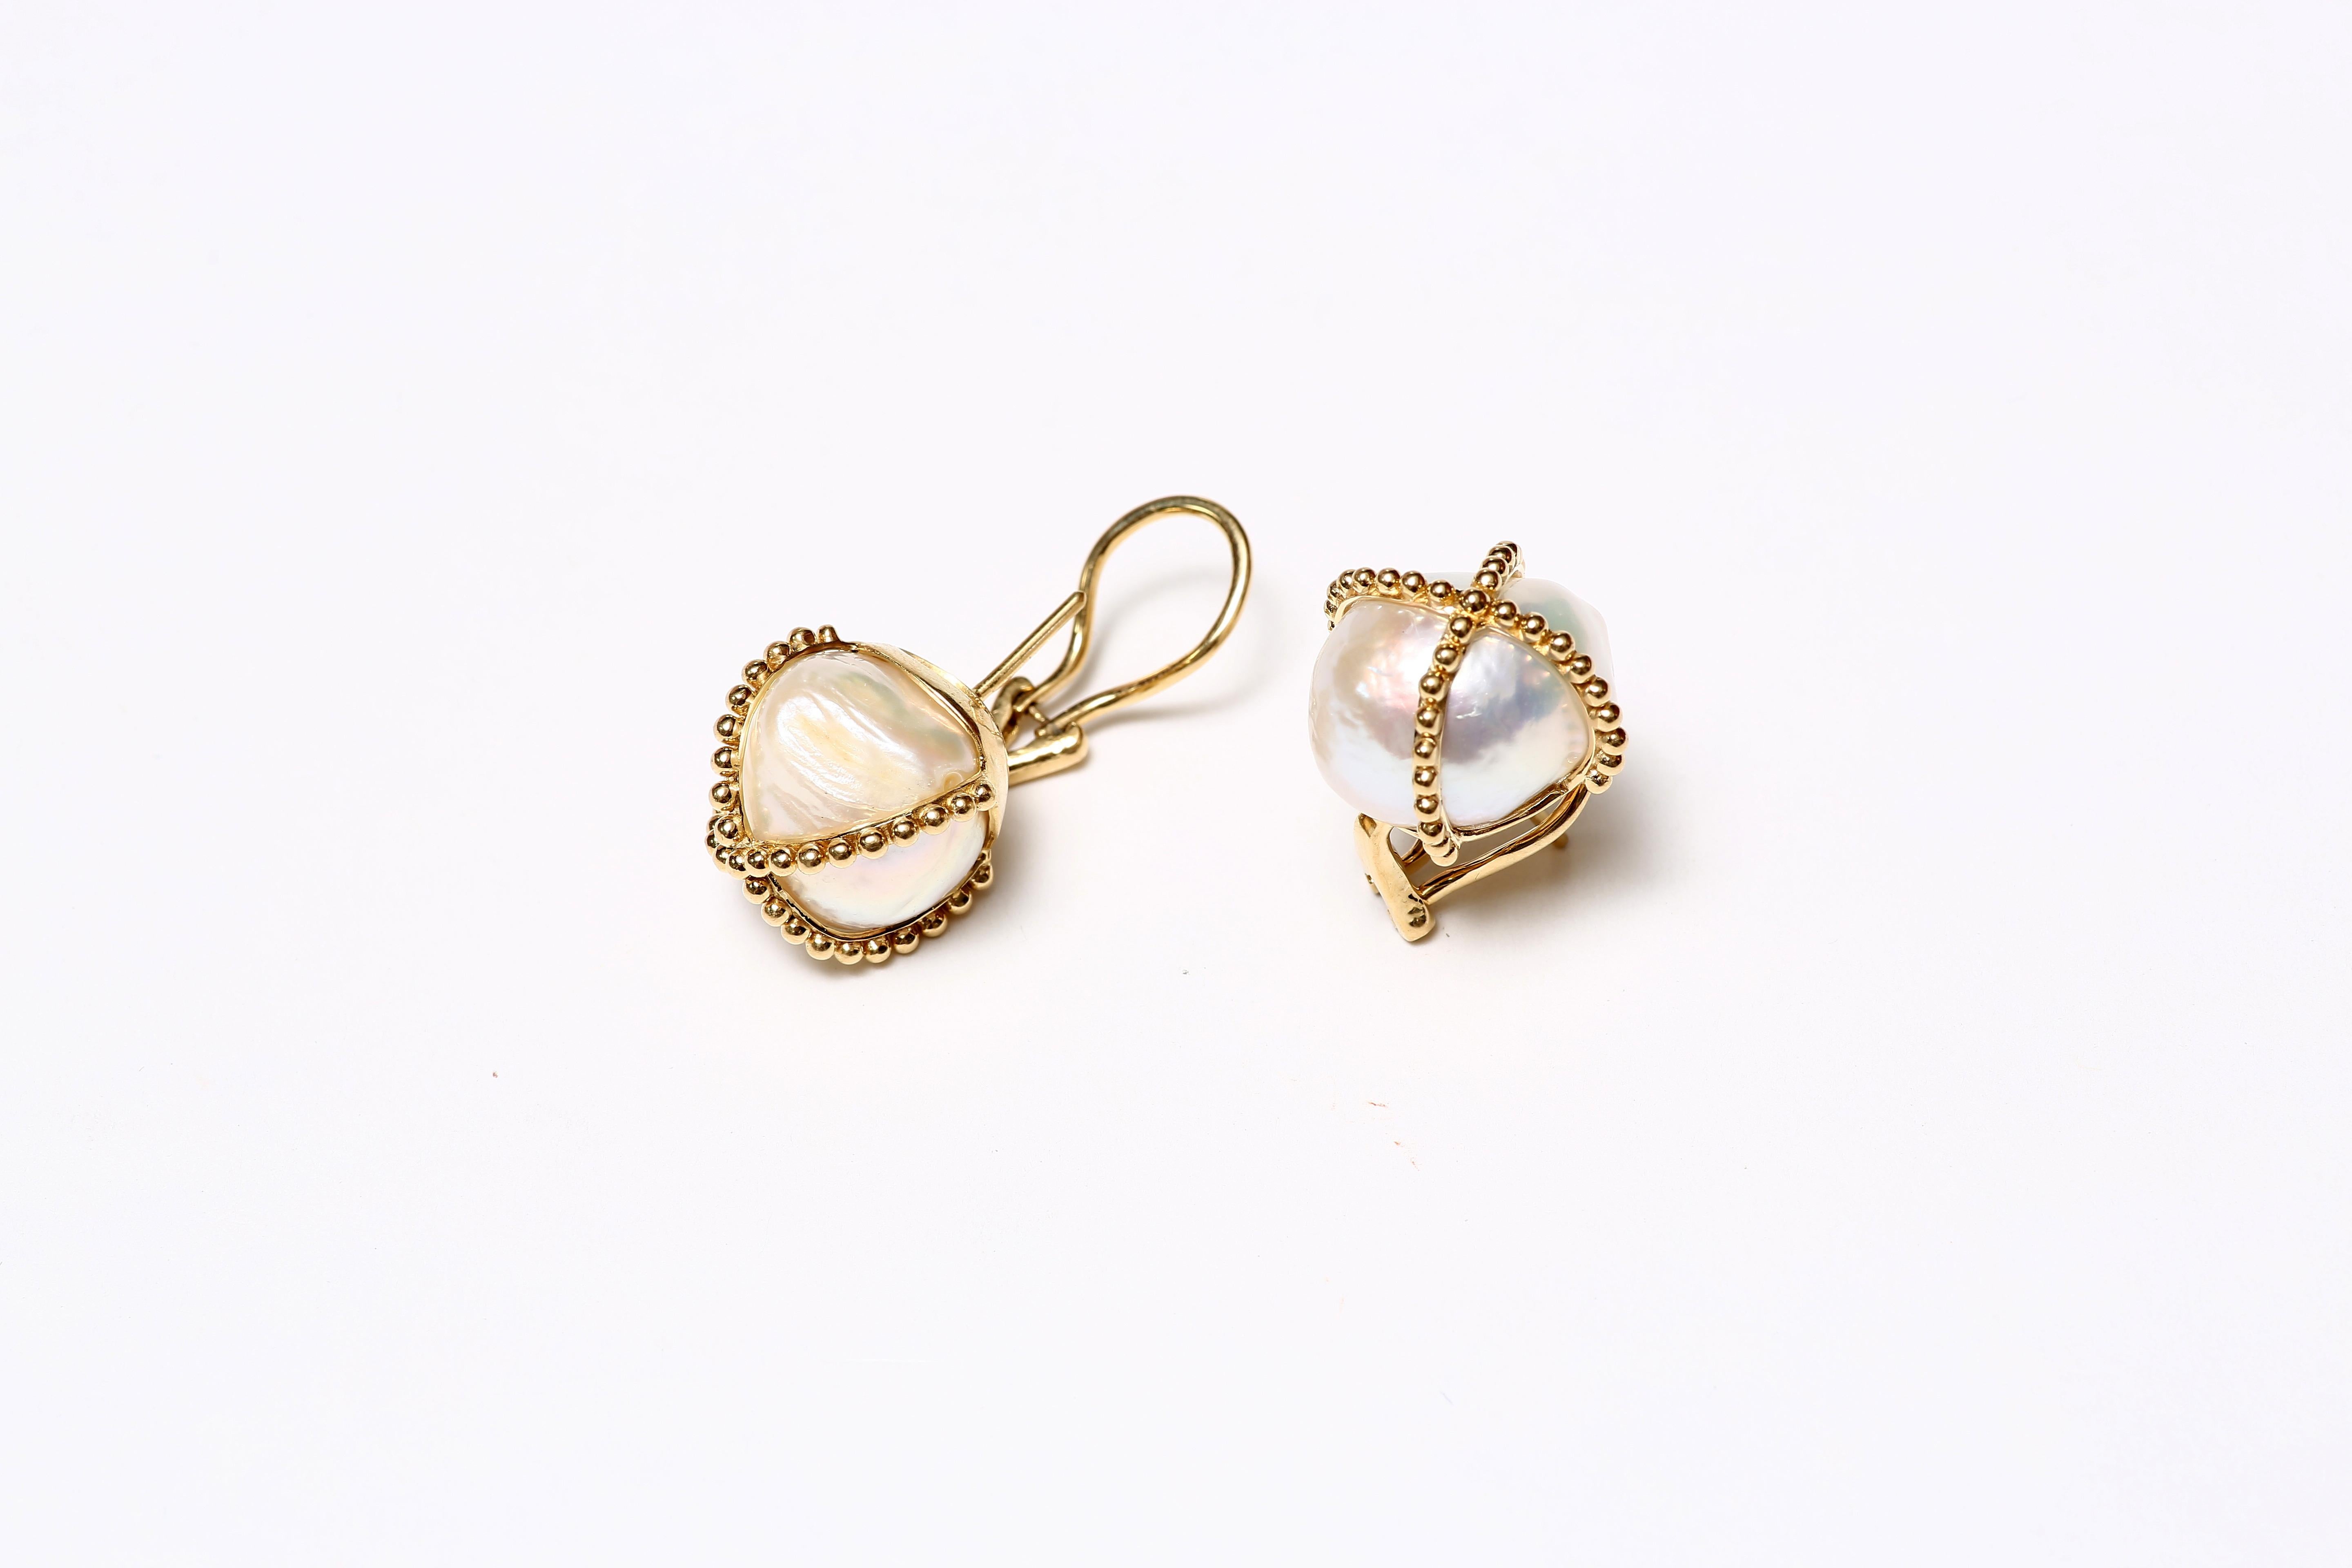 A fine pair of batoque pearl earrings designed with 18K gold twisted vine cross wrapped around the pearl. The posts & clips are 18K gold.  

Designed by AMANDA CLARK for Altfield, our collection focuses on natures most lovely materials such as